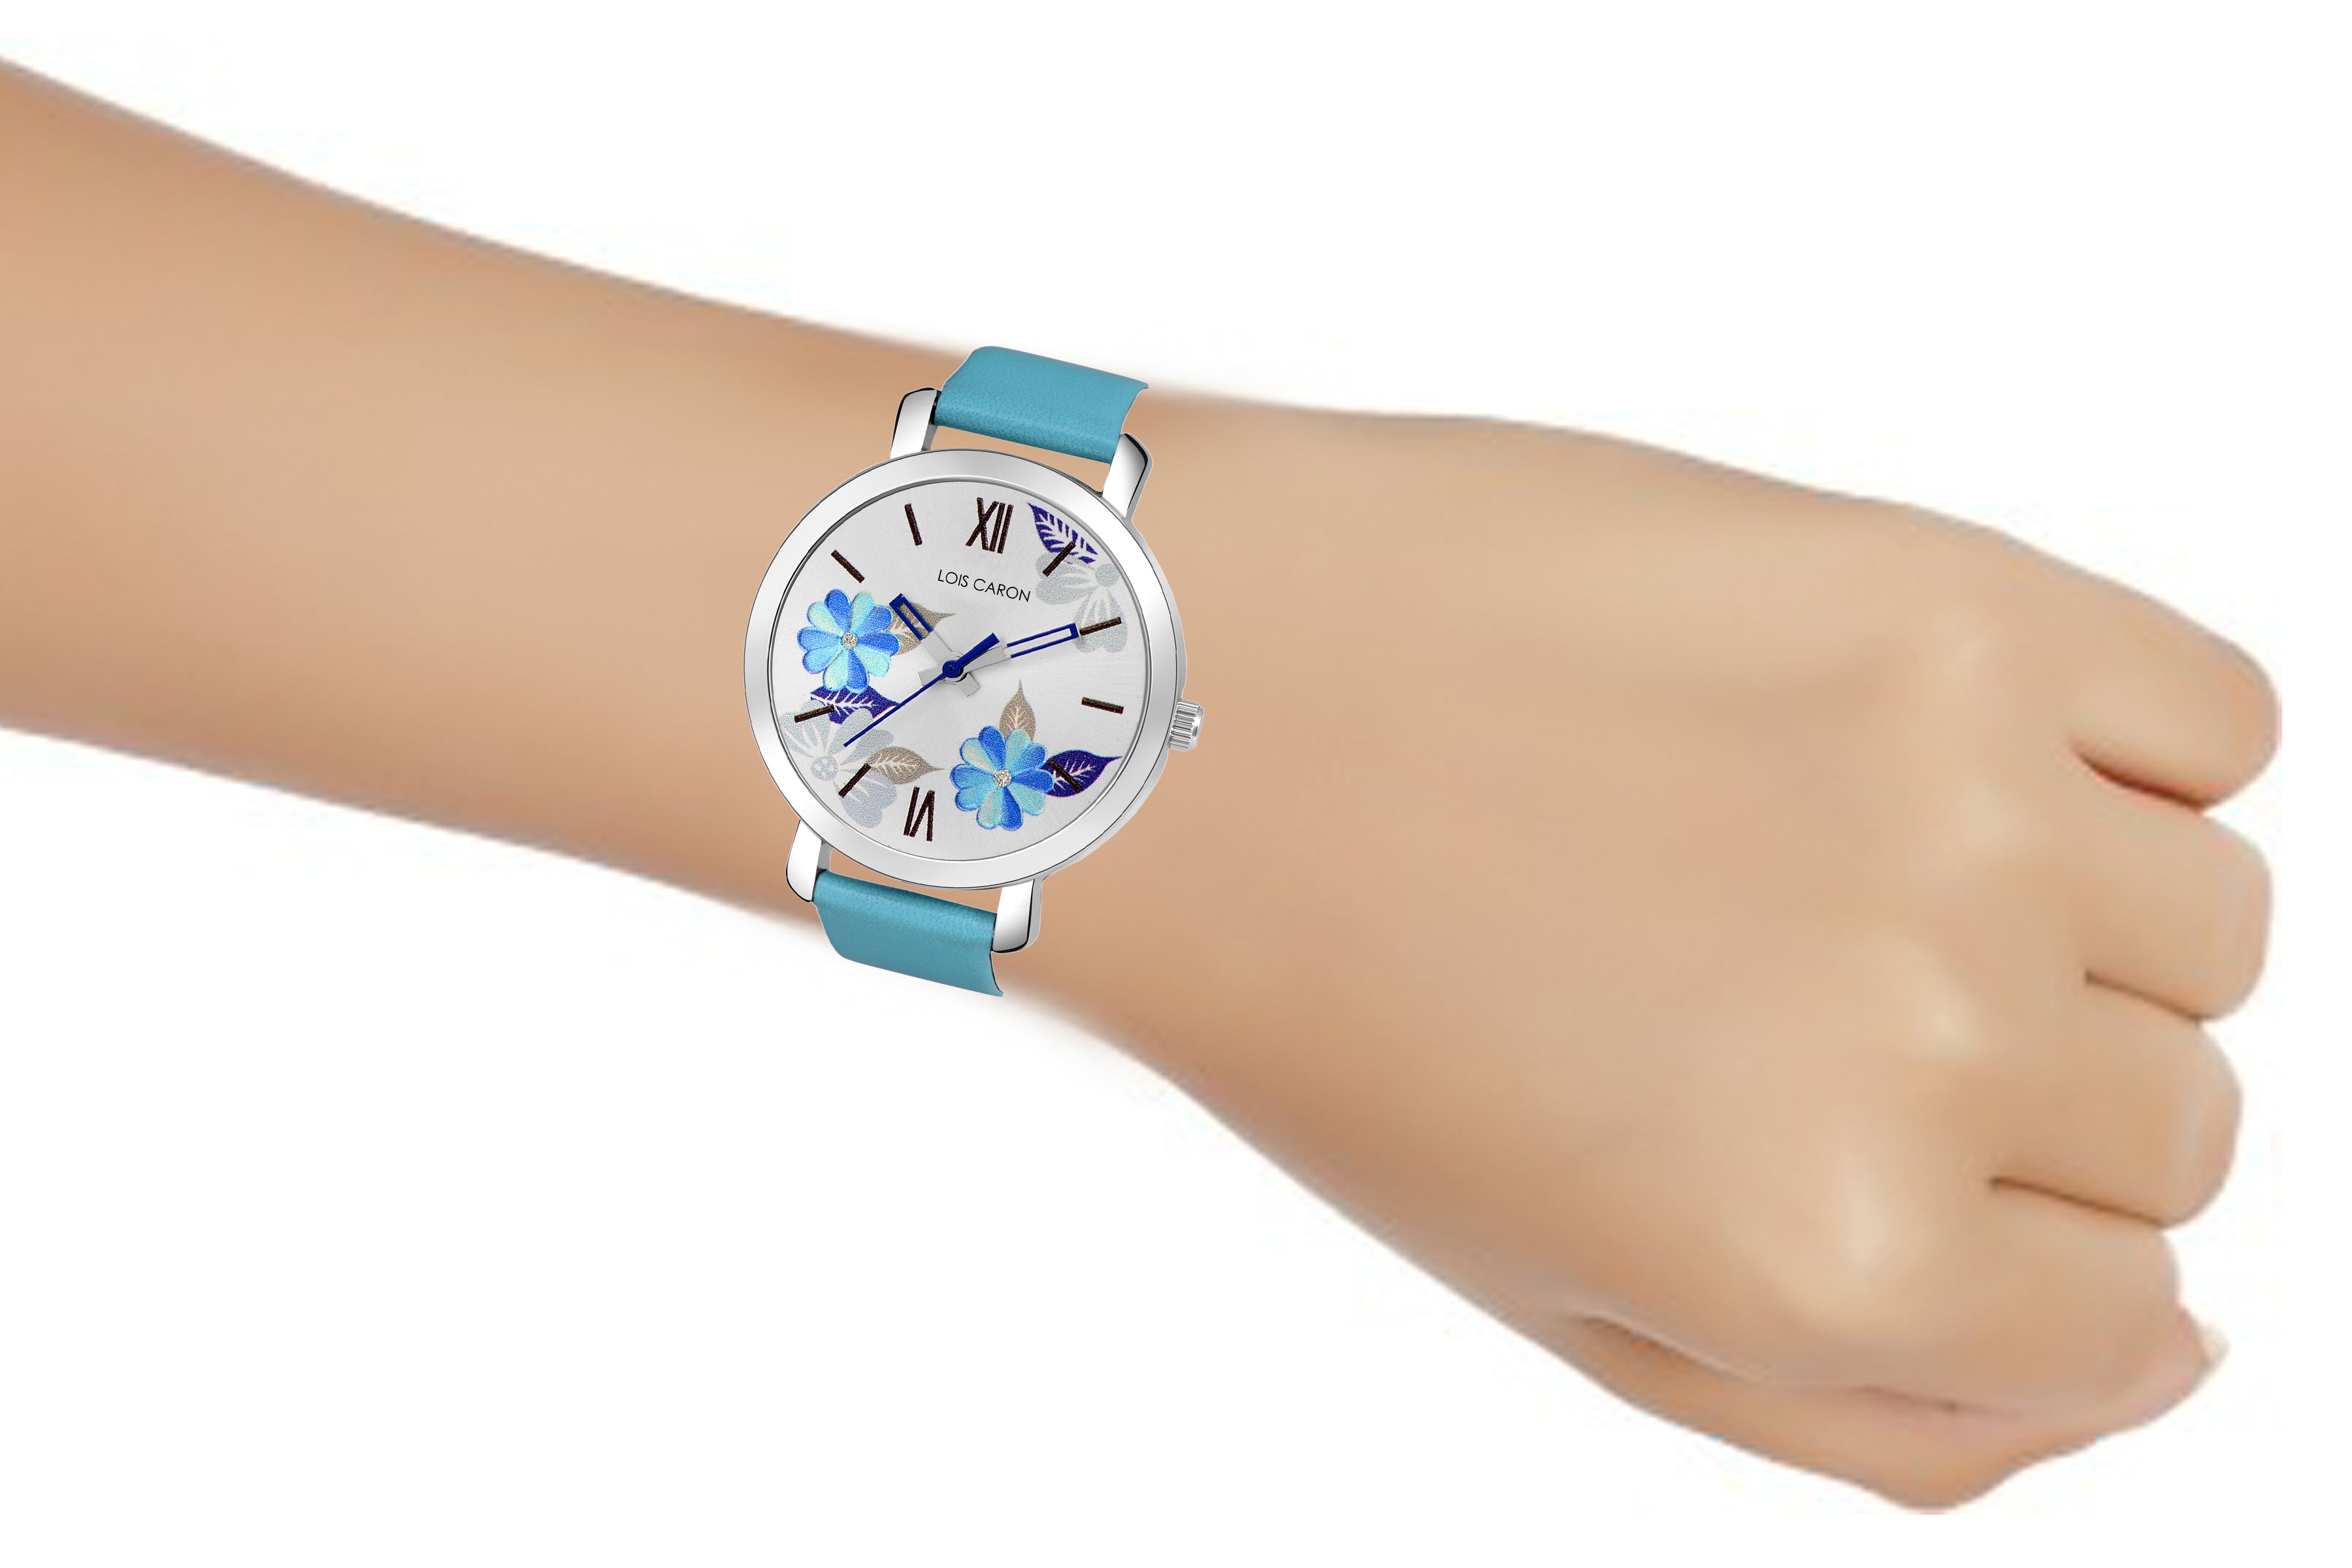 WHITE DIAL & SKY BLUE LEATHER STRAP FOR GIRLS Analog Watch - For Girls LCS-4693